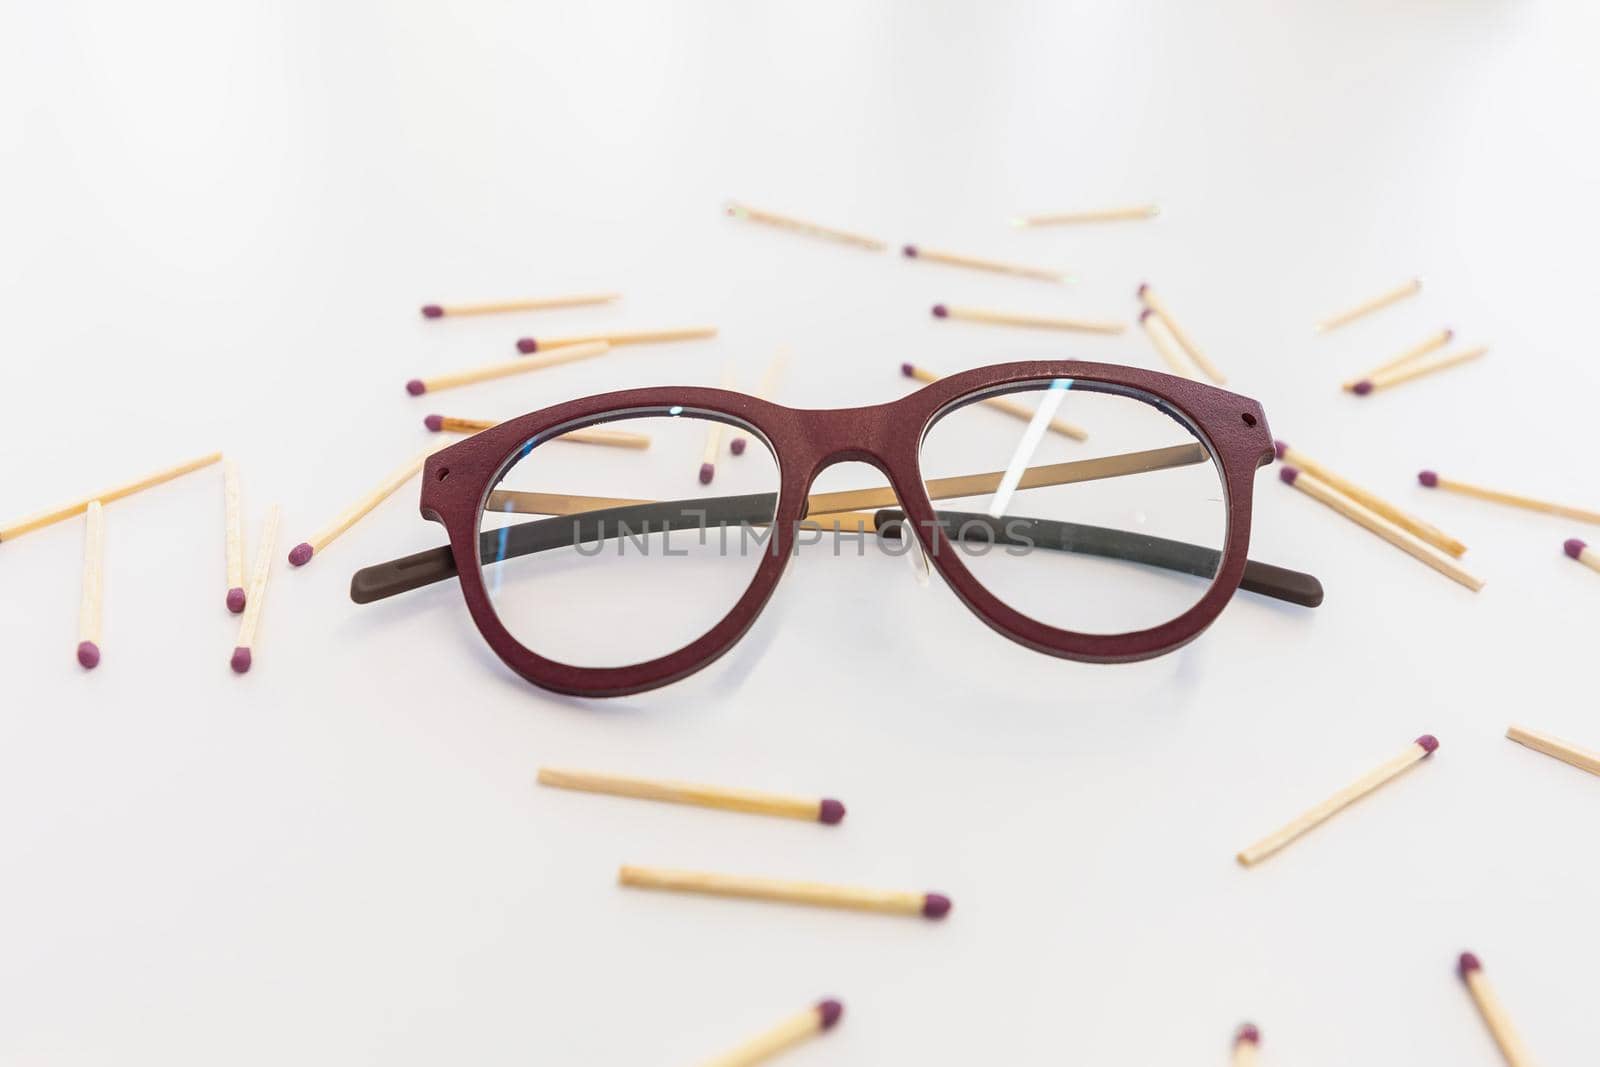 Glasses on a white table surrounded by matches by wip3out